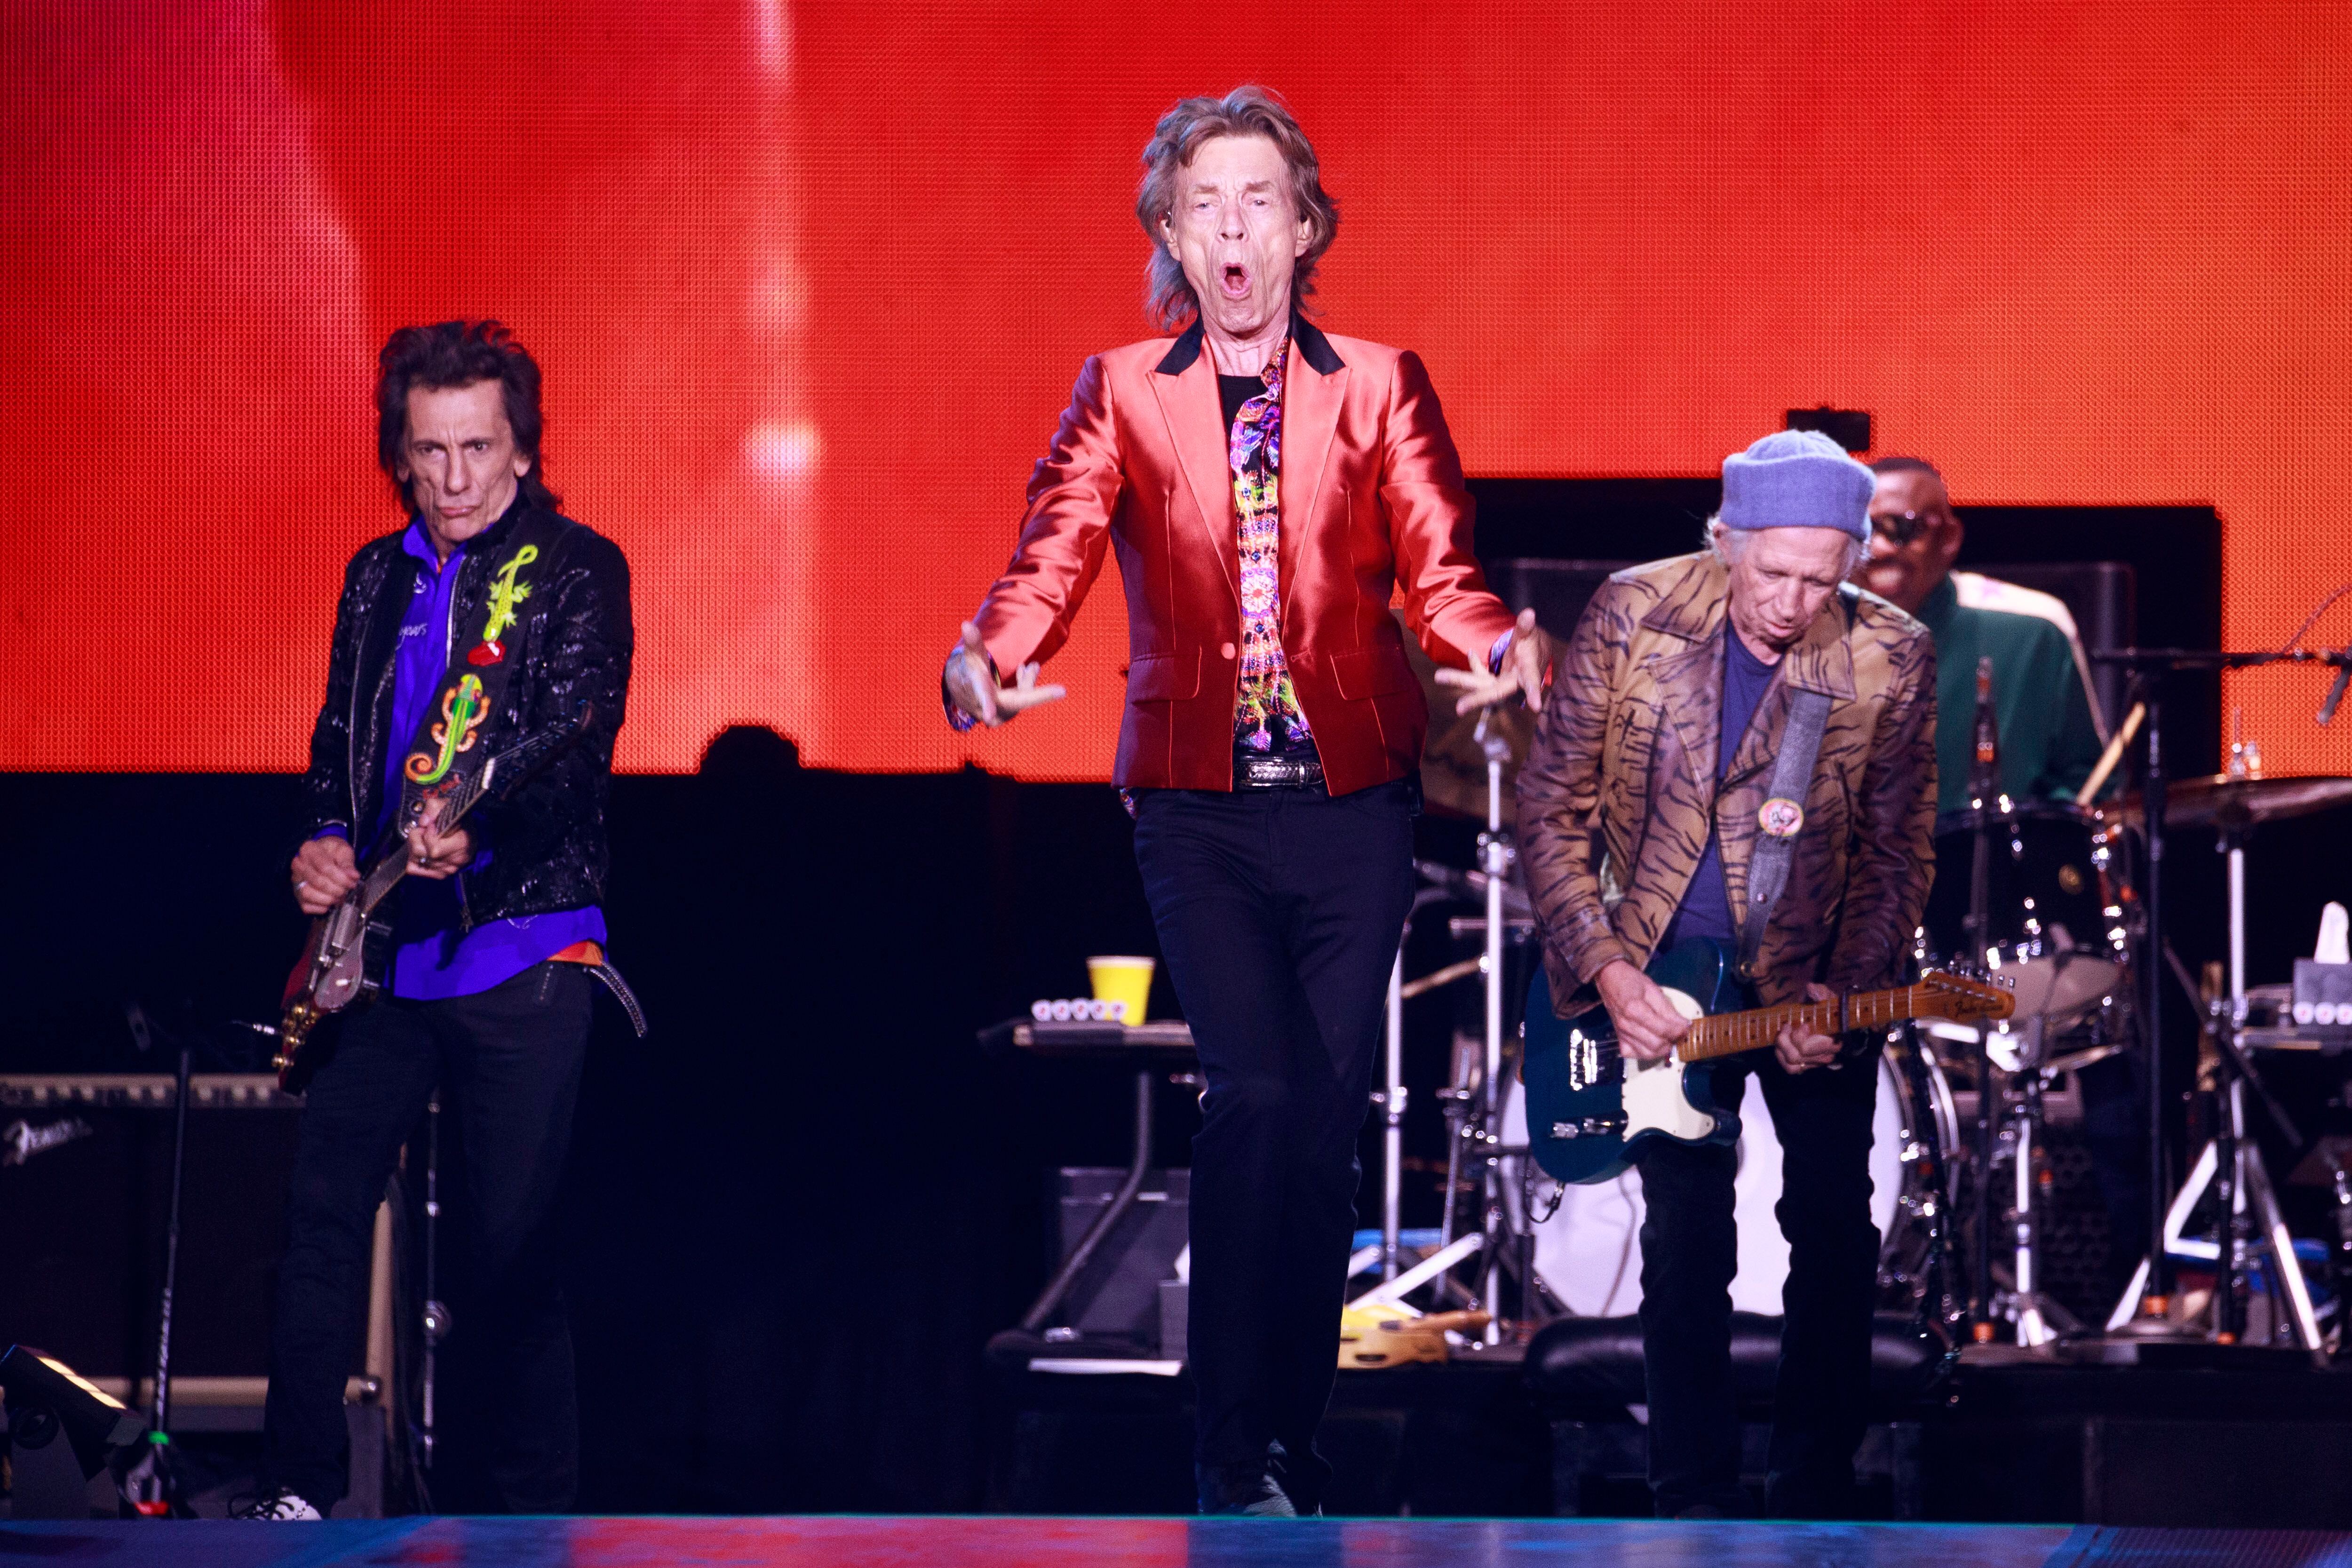 Ron Wood, Mick Jagger and Keith Richards at the Rolling Stones concert in Madrid in June.